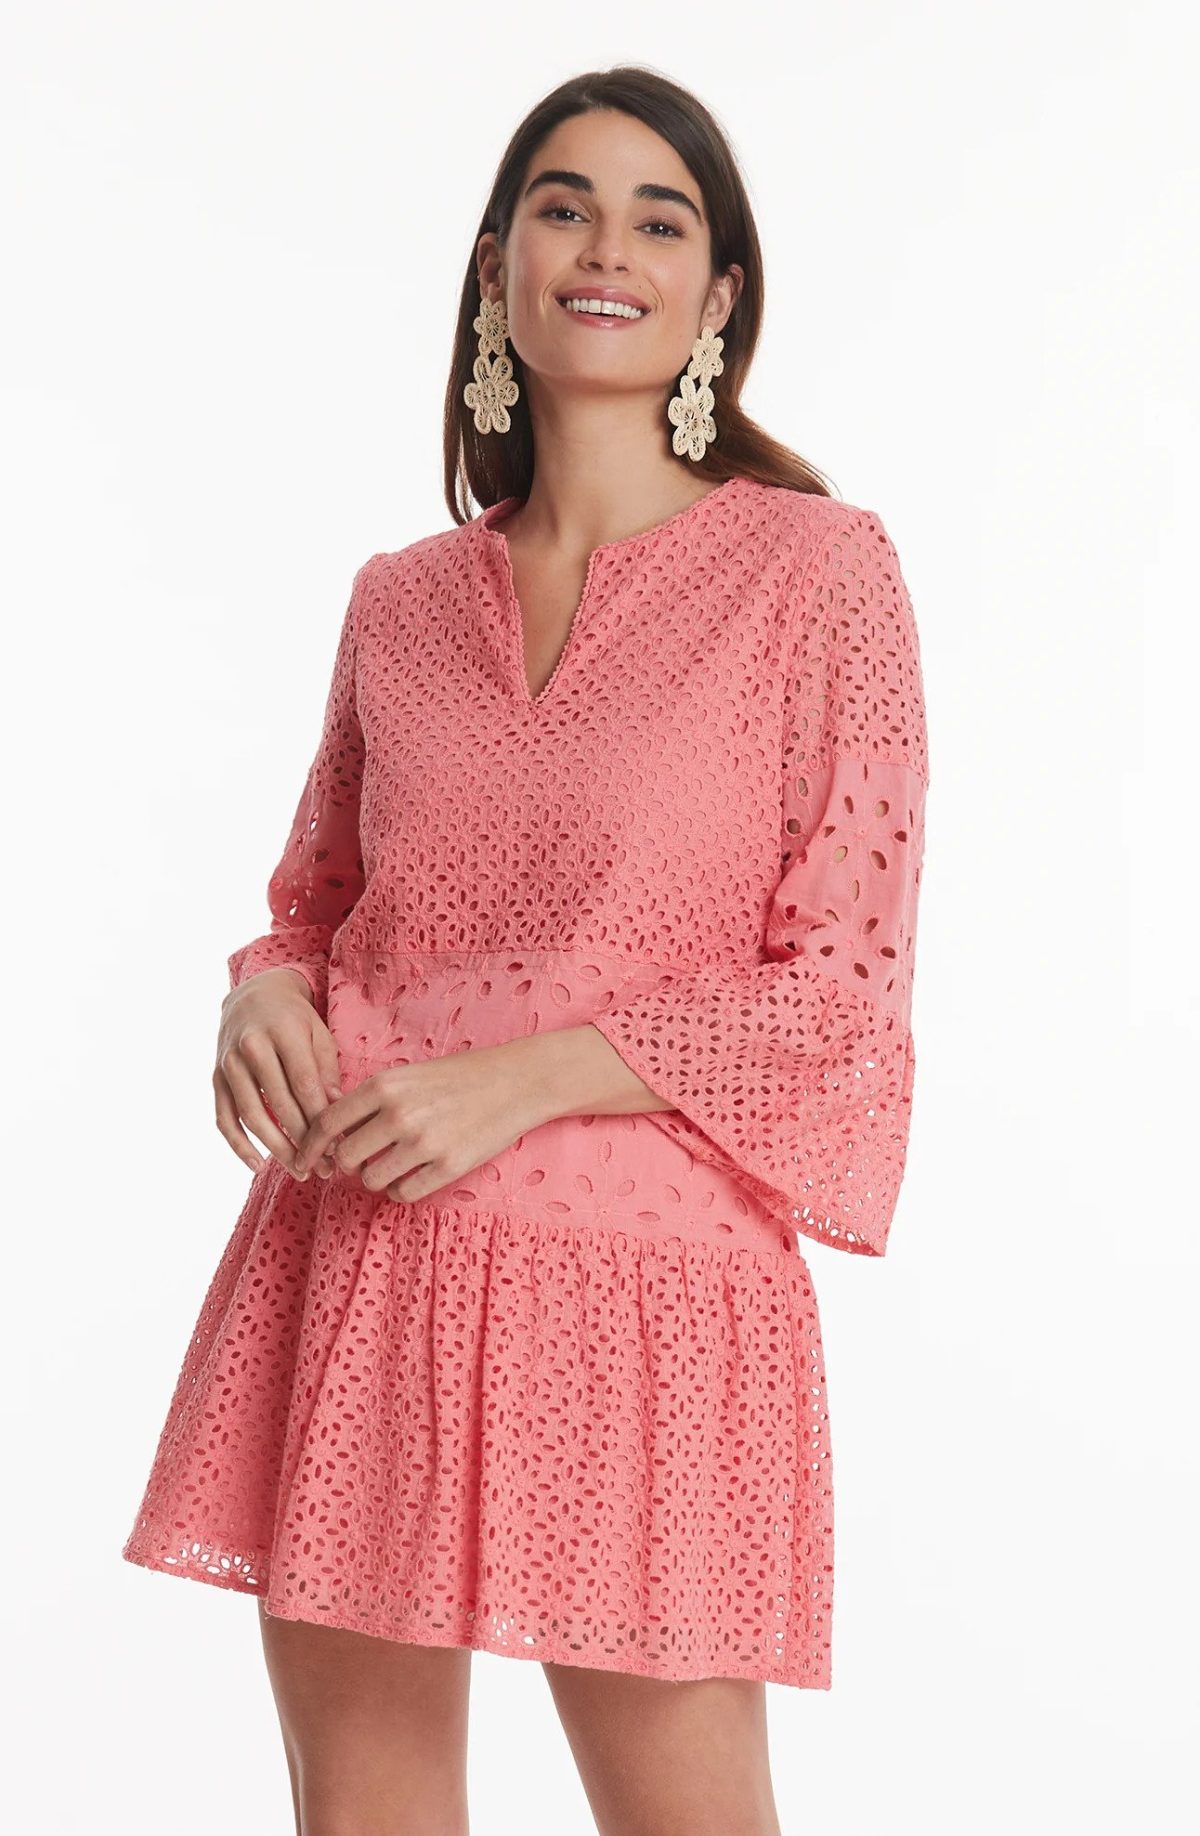 Tyler Boe 32201V Tea Rose Isla Eyelet Dress | Ooh Ooh Shoes women's clothing and shoe boutique located in Naples and Mashpee